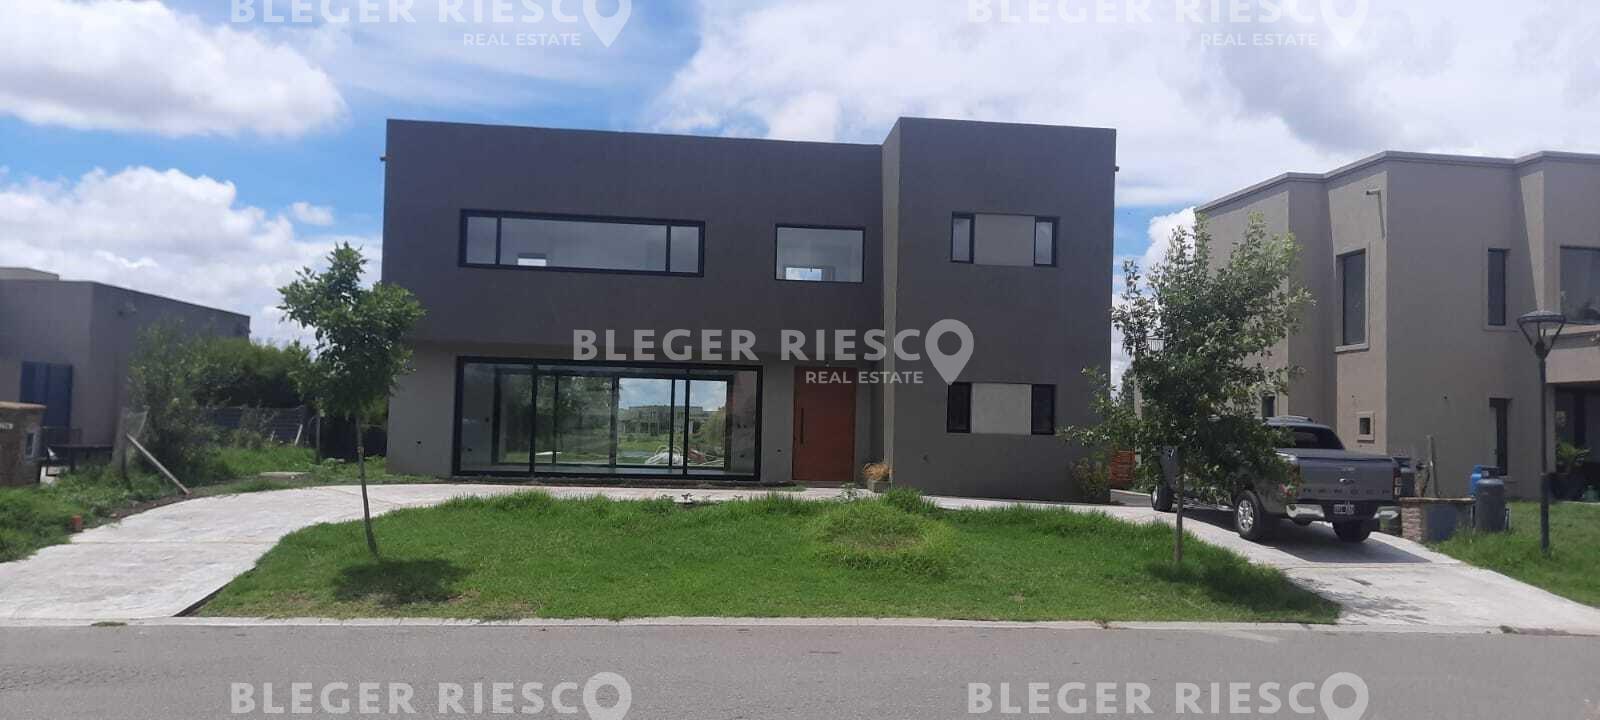 #3994855 | Sale | House | El Canton (Bleger-Riesco Real State)